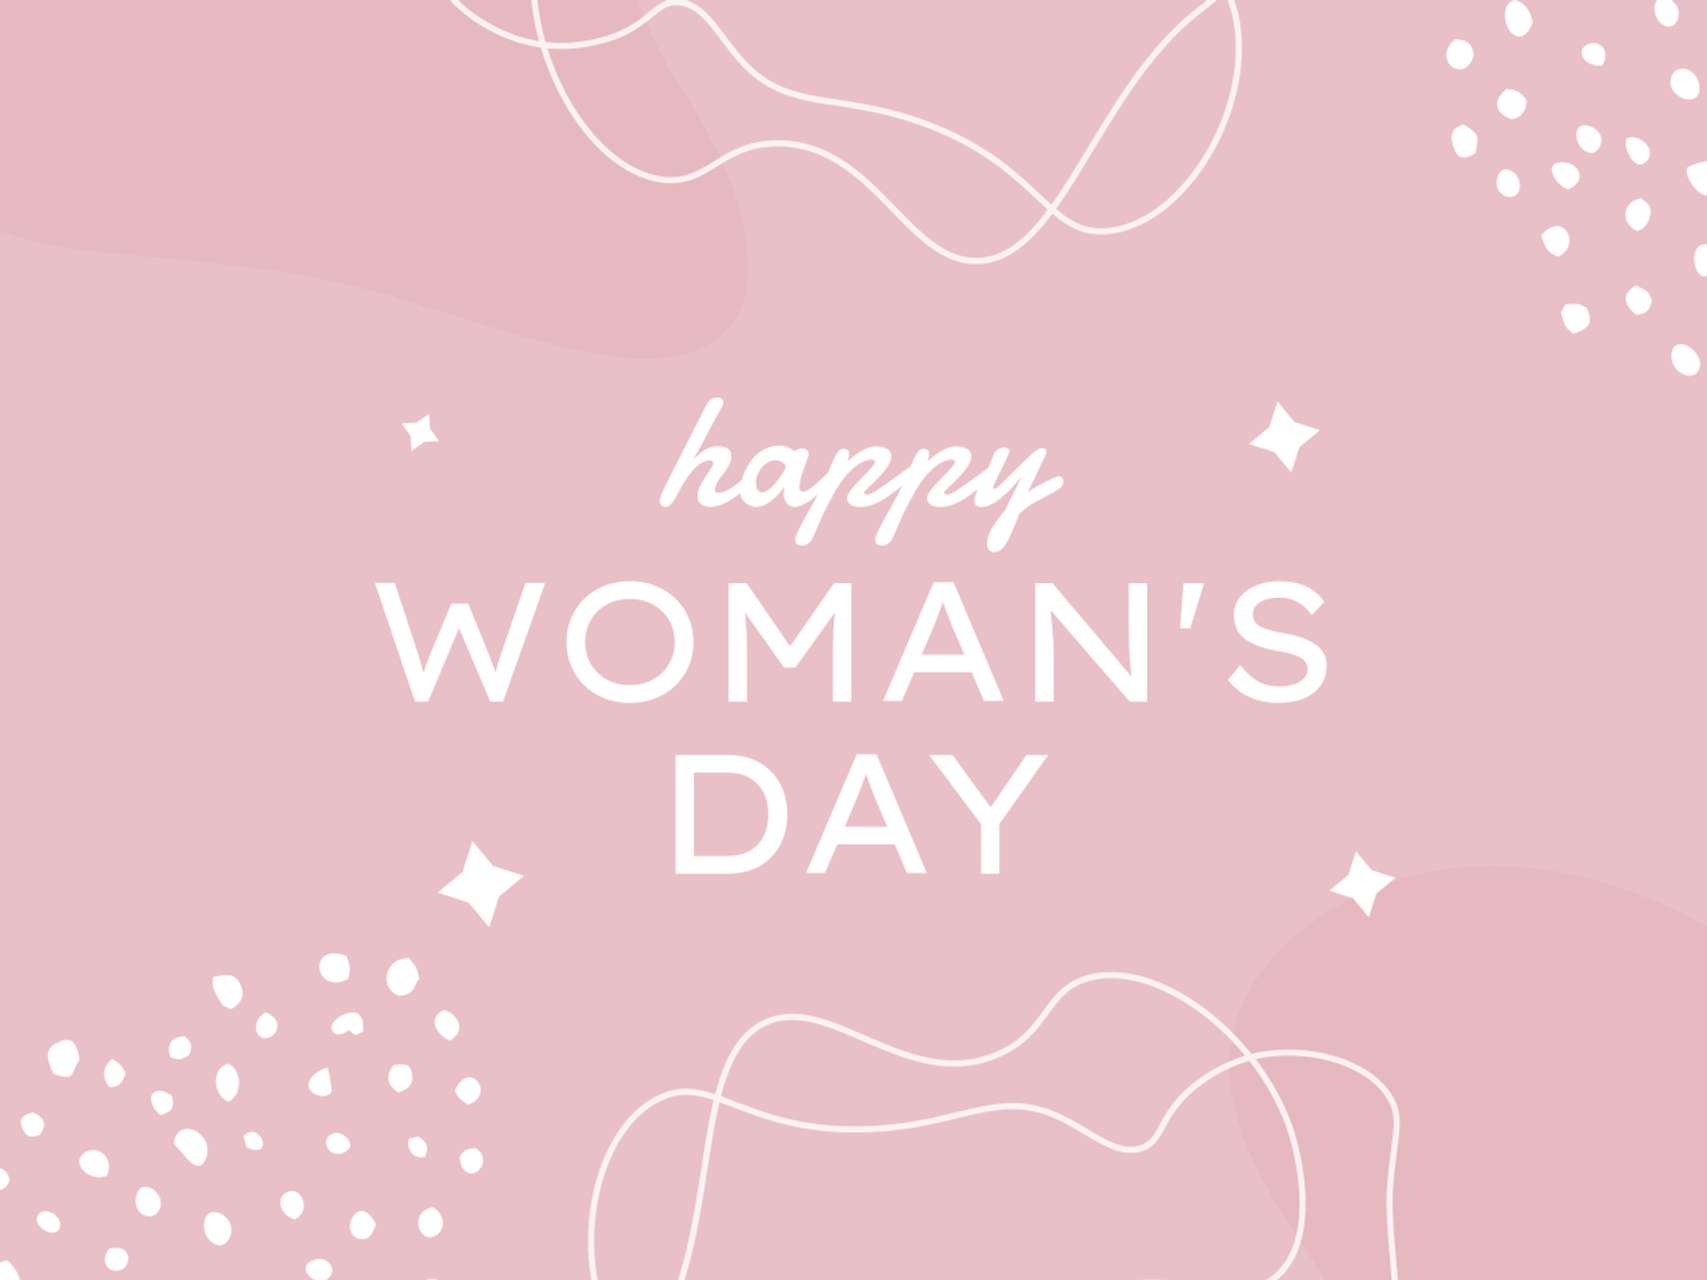 Women's day Templates Pack